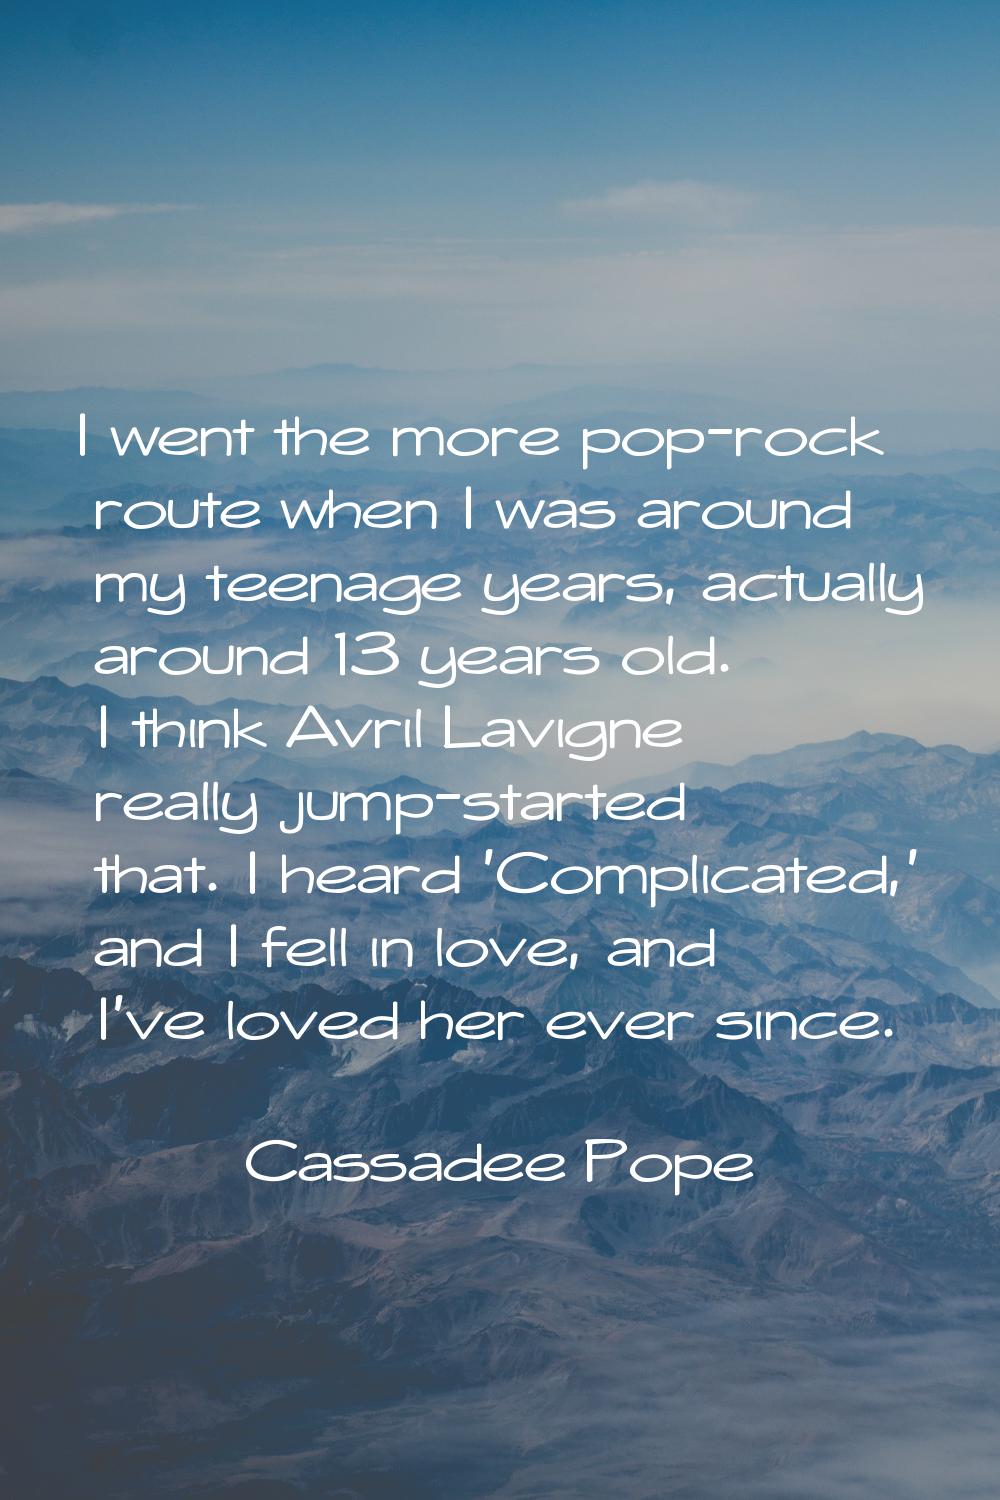 I went the more pop-rock route when I was around my teenage years, actually around 13 years old. I 